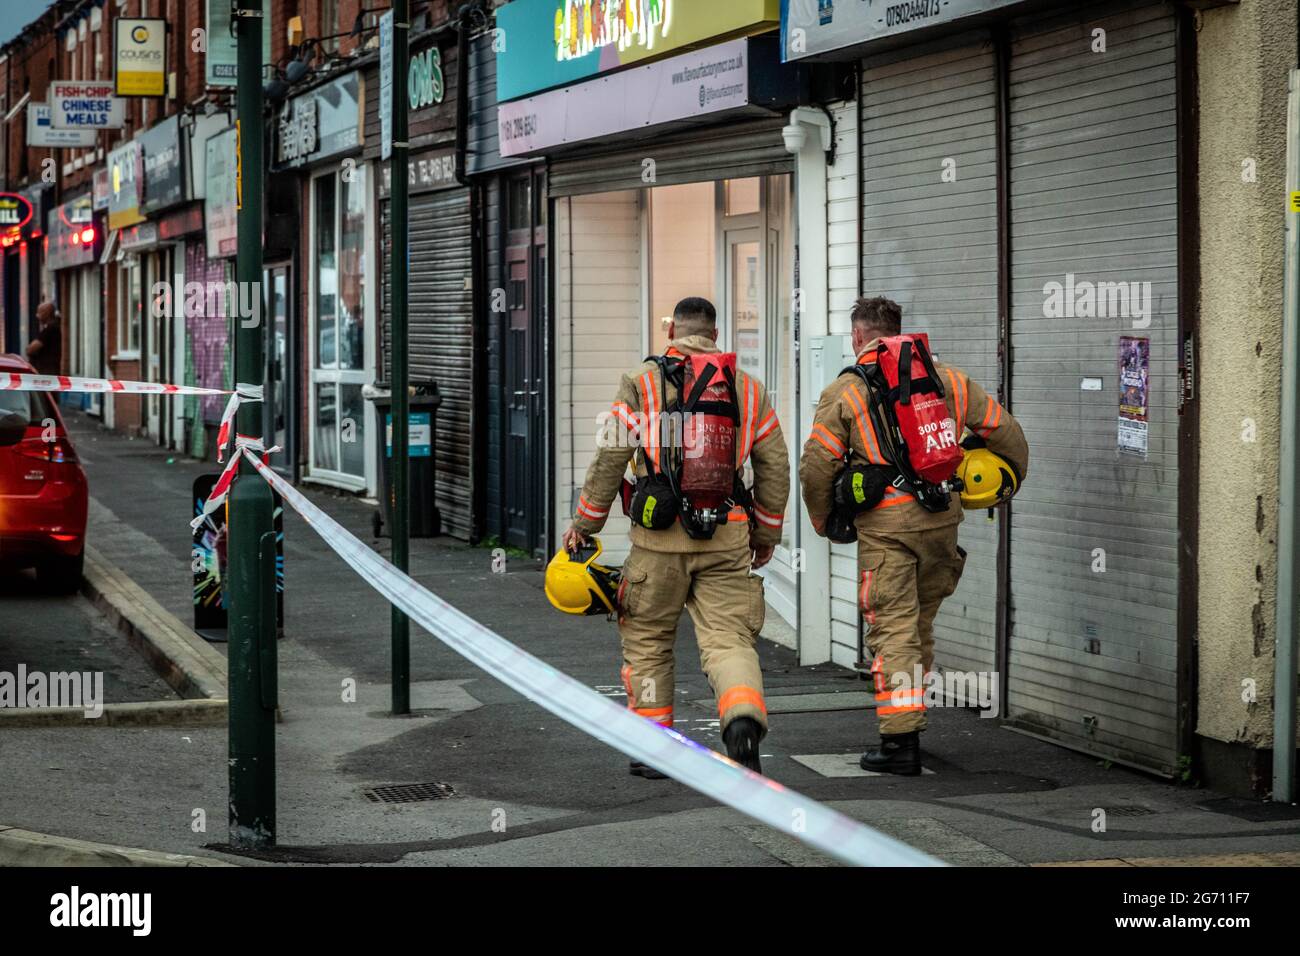 Manchester, UK. 09th July, 2021. Firefighters walk to the scene of the house fire in Manchester.Greater Manchester Fire Service block off Norman Street, Failsworth after a house fire in a flat on Manchester Road. Residents say the house fire was caused by a man who wanted to commit suicide however conflicting reports also came me that the man was cooking. Two fire trucks and a fire commander responded to the scene. Credit: SOPA Images Limited/Alamy Live News Stock Photo